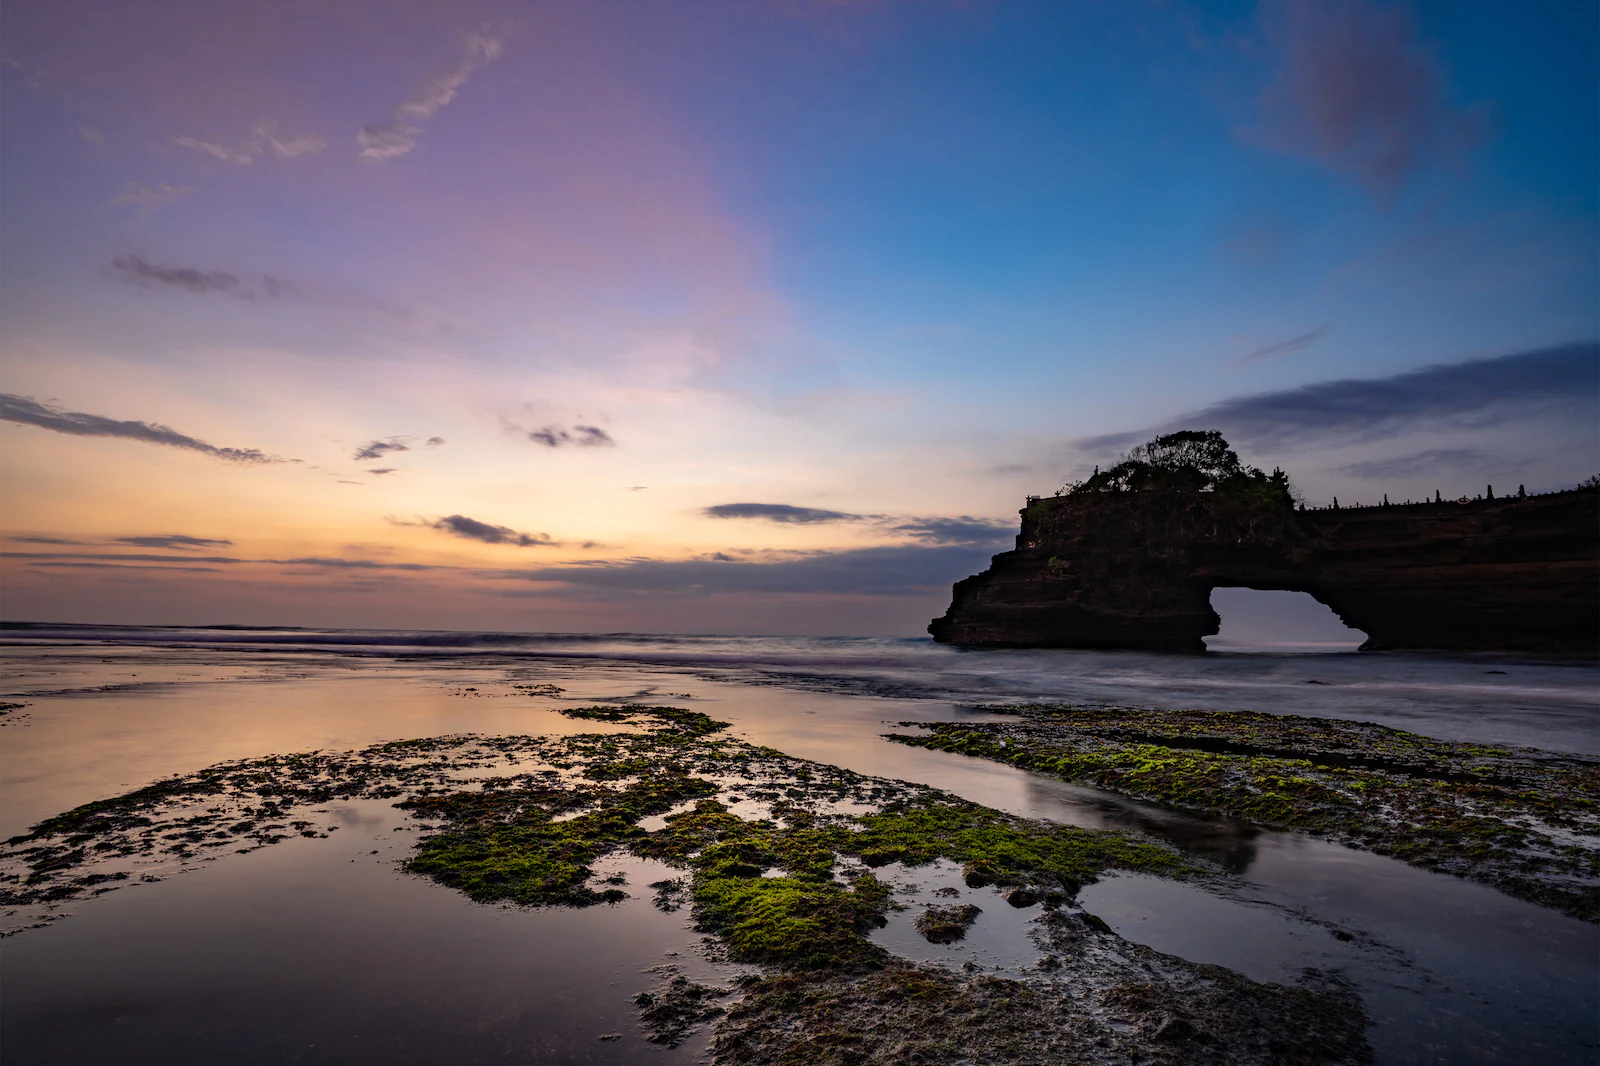 Evening skies of ocean on Tanah Lot Temple